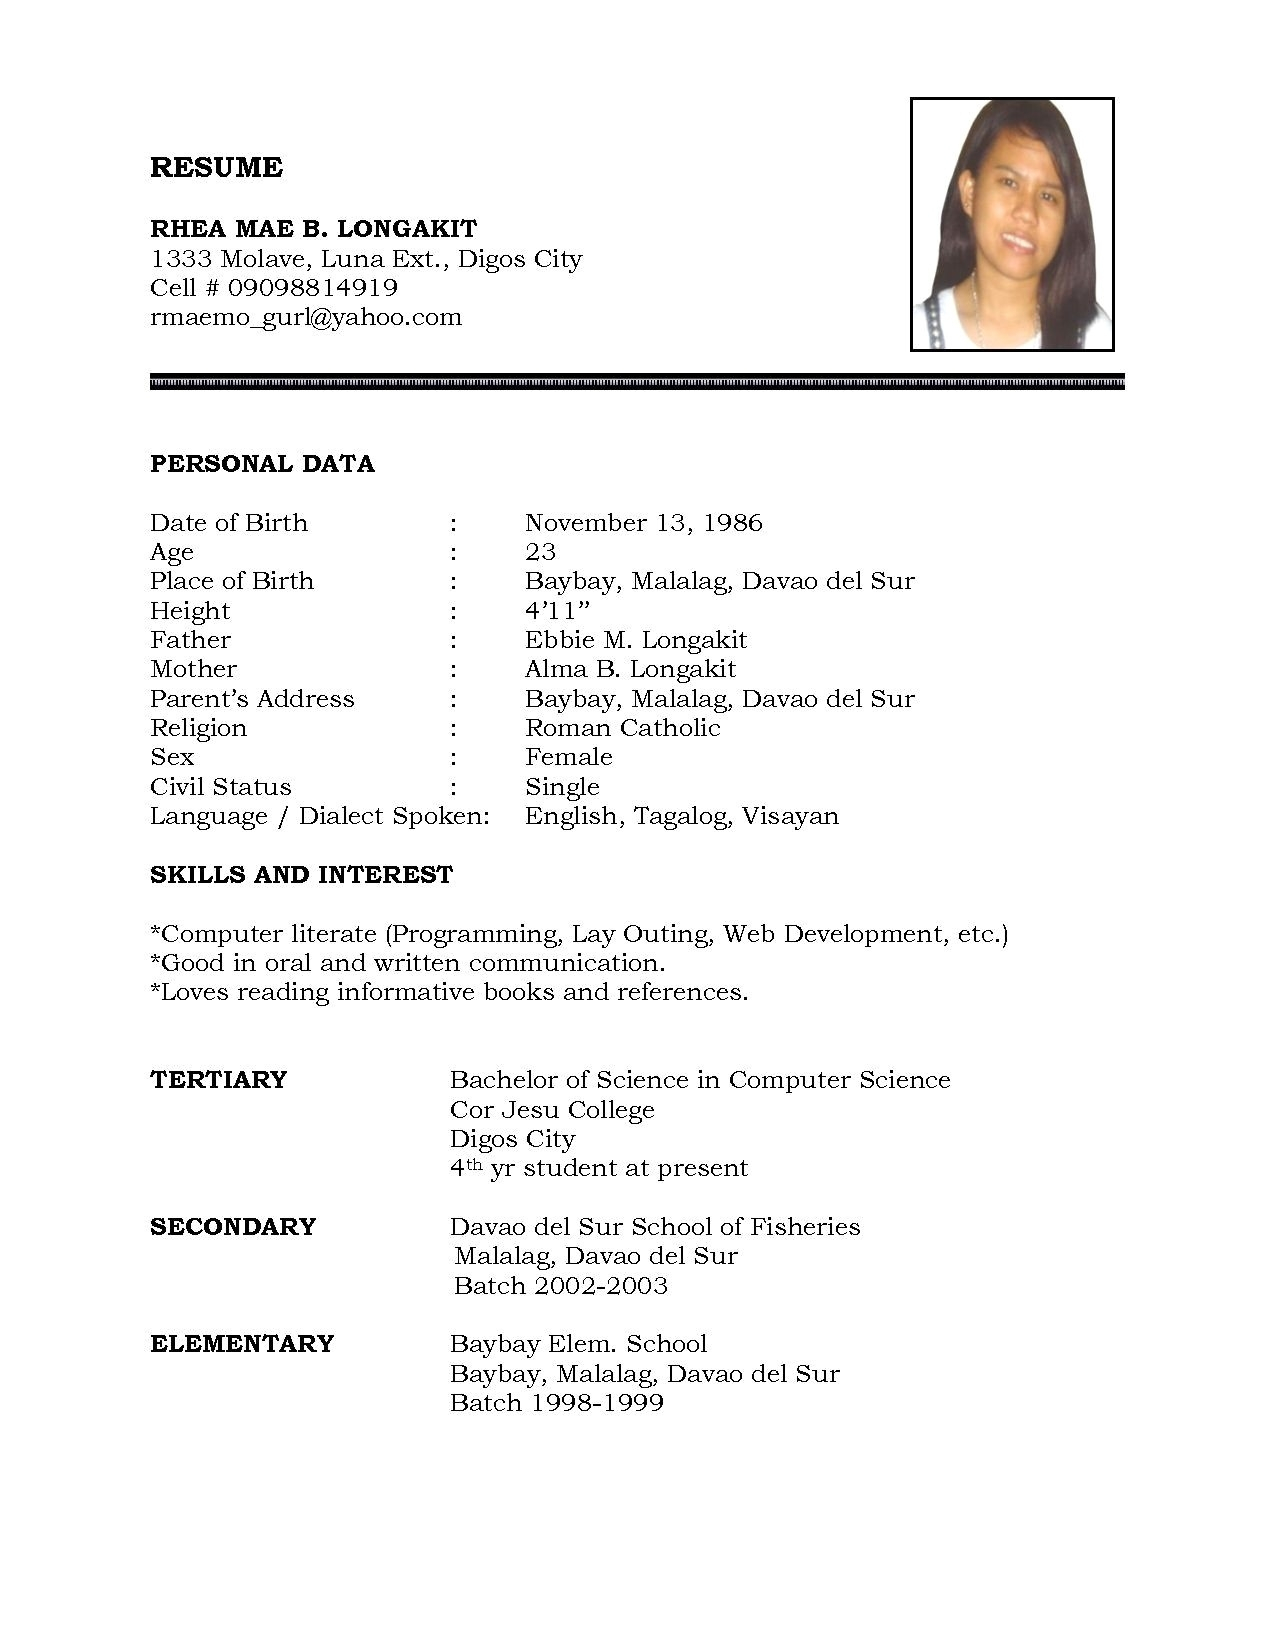 Basic Resume Template Free Resume Template Word Docx Basic Docormat Sampleill In The Blank